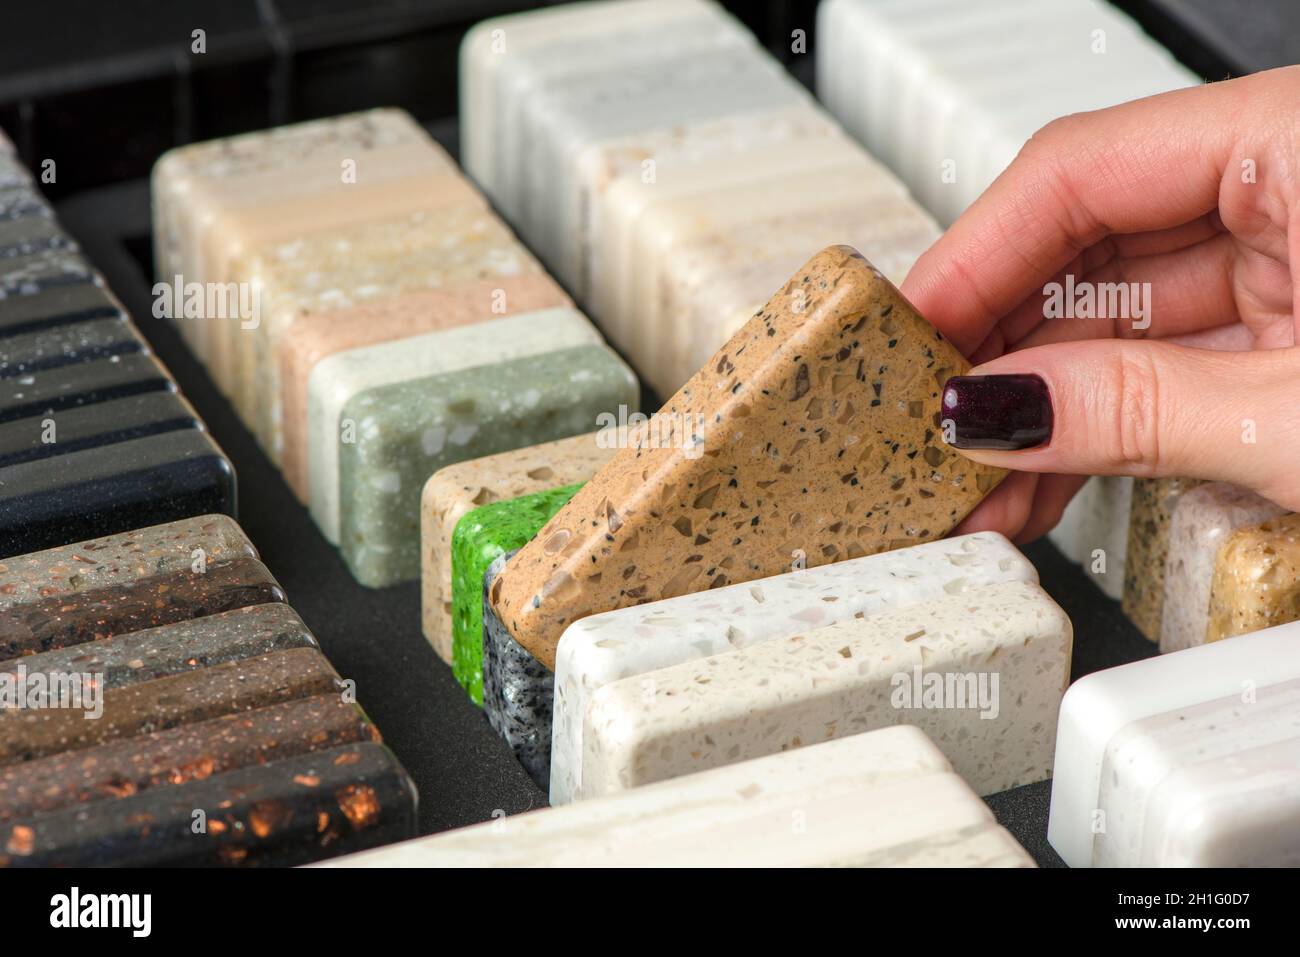 A woman chooses stone samples for a kitchen countertop. A set of multi-colored samples of artificial acrylic stone. Stock Photo